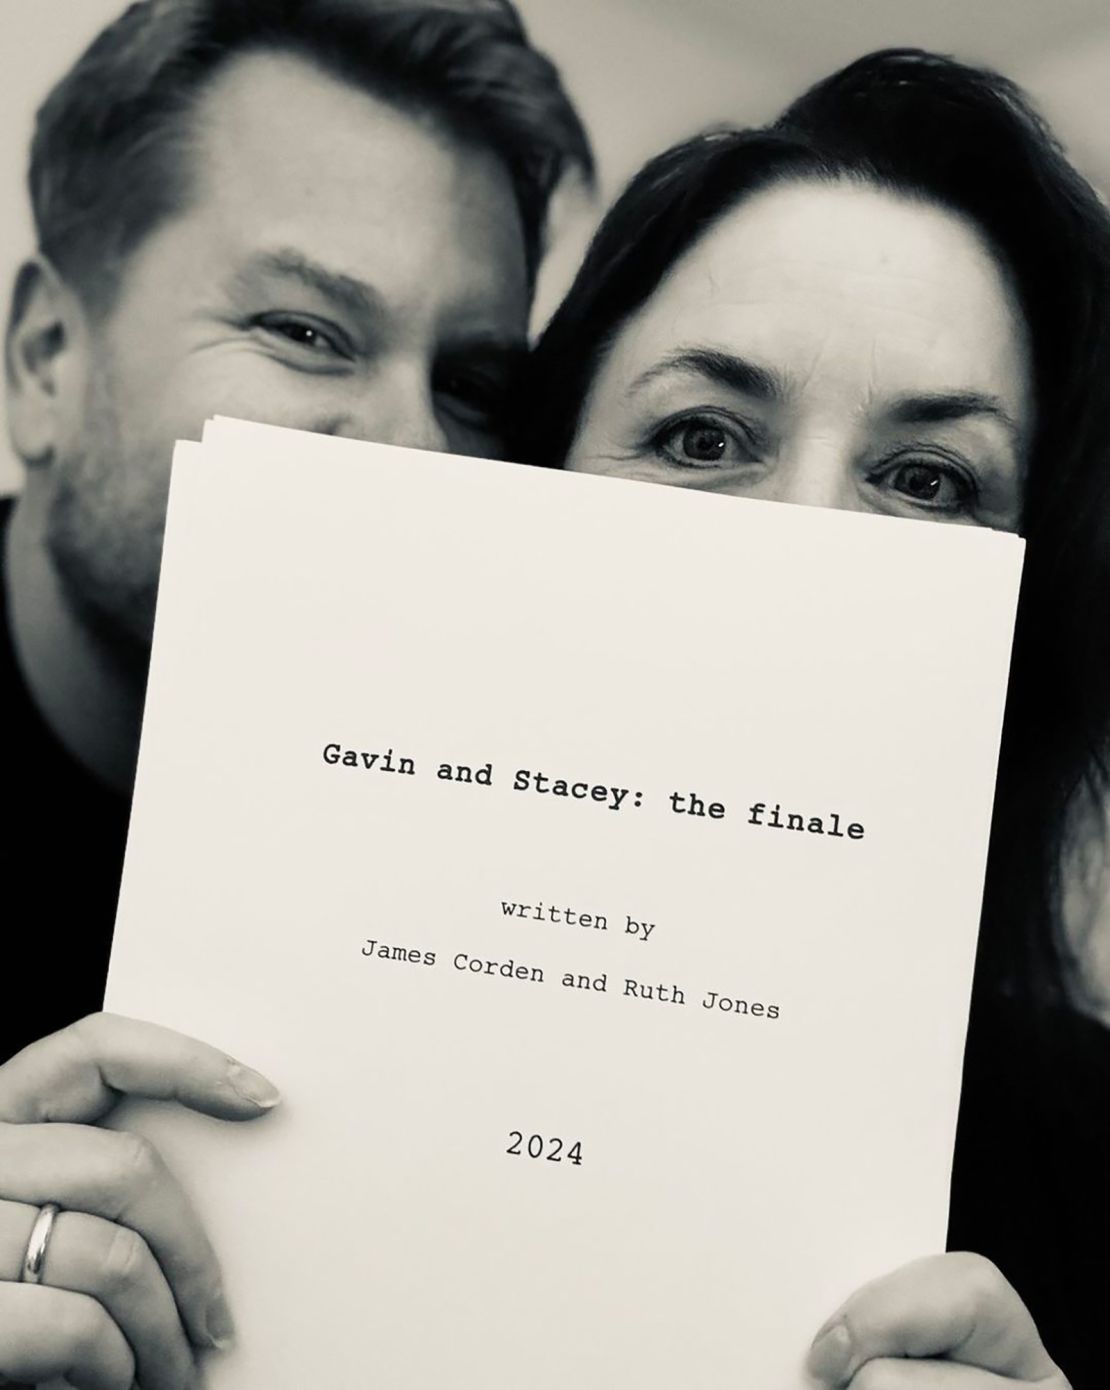 James Corden announced the final Gavin and Stacey episode by posting a photo of himself and Ruth Jones holding the script for the finale.